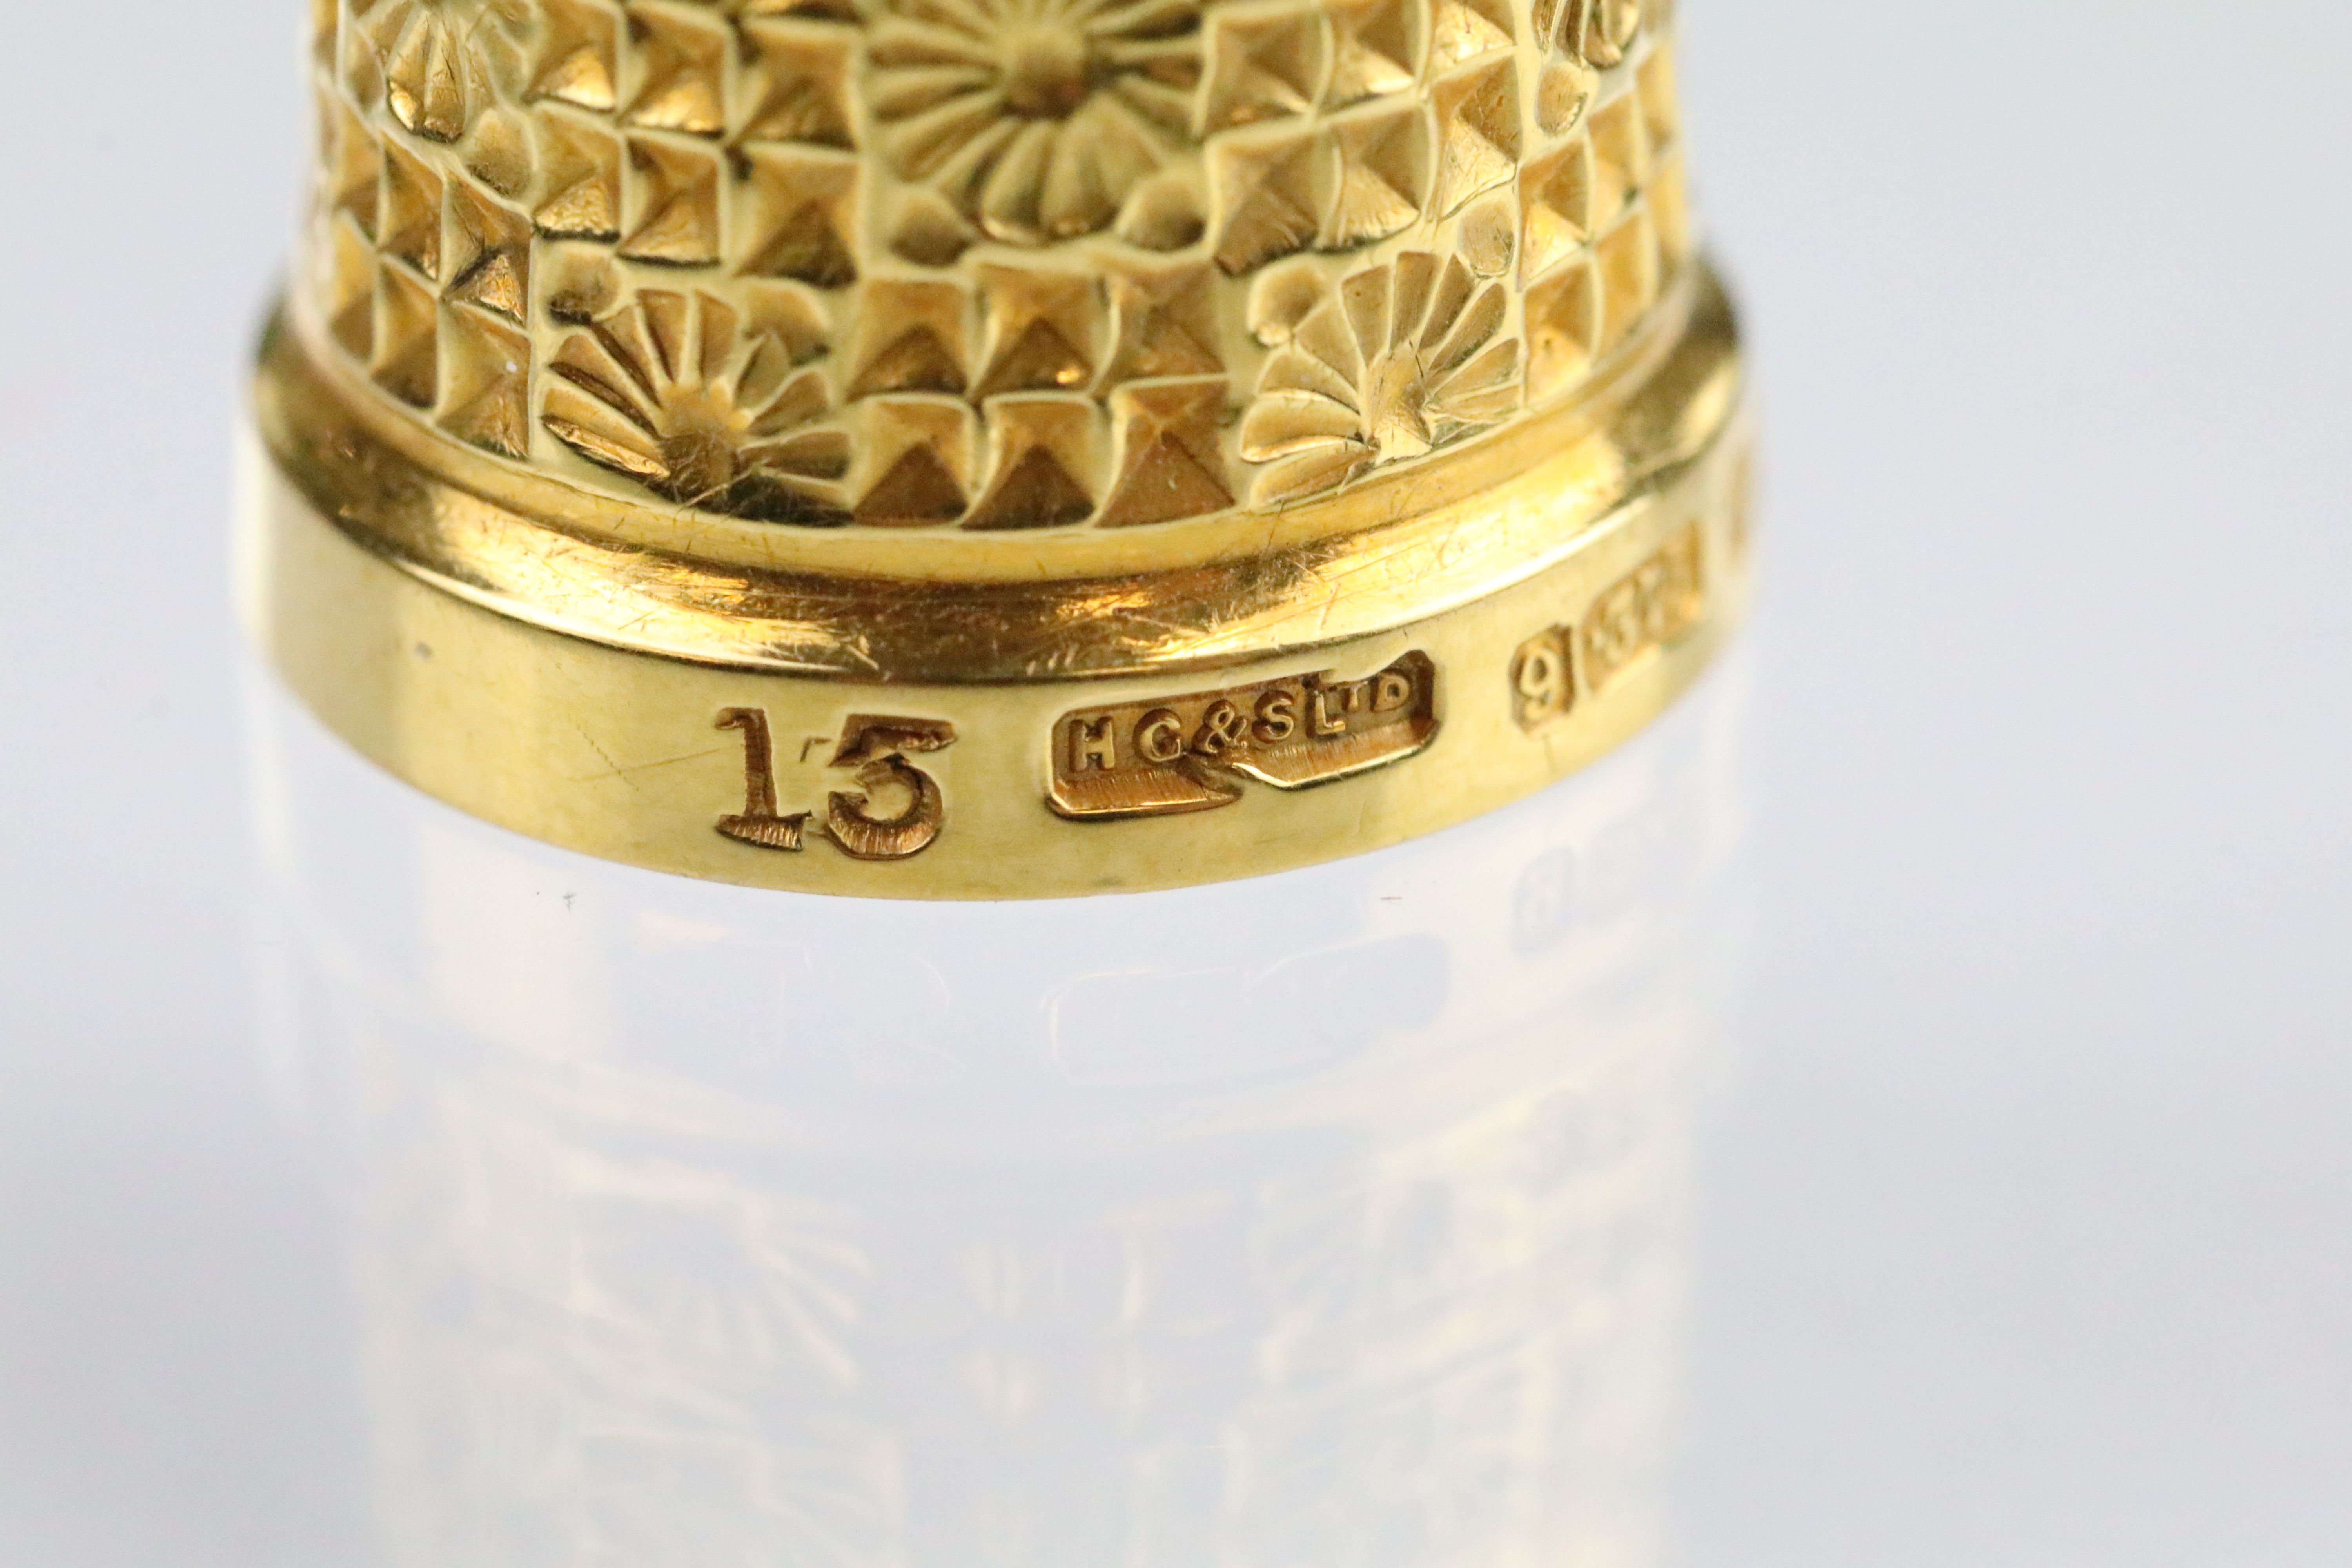 9ct gold hallmarked thimble with moulded details, size 15. Hallmarked Birmingham 1902, HG & S Ltd. - Image 3 of 4